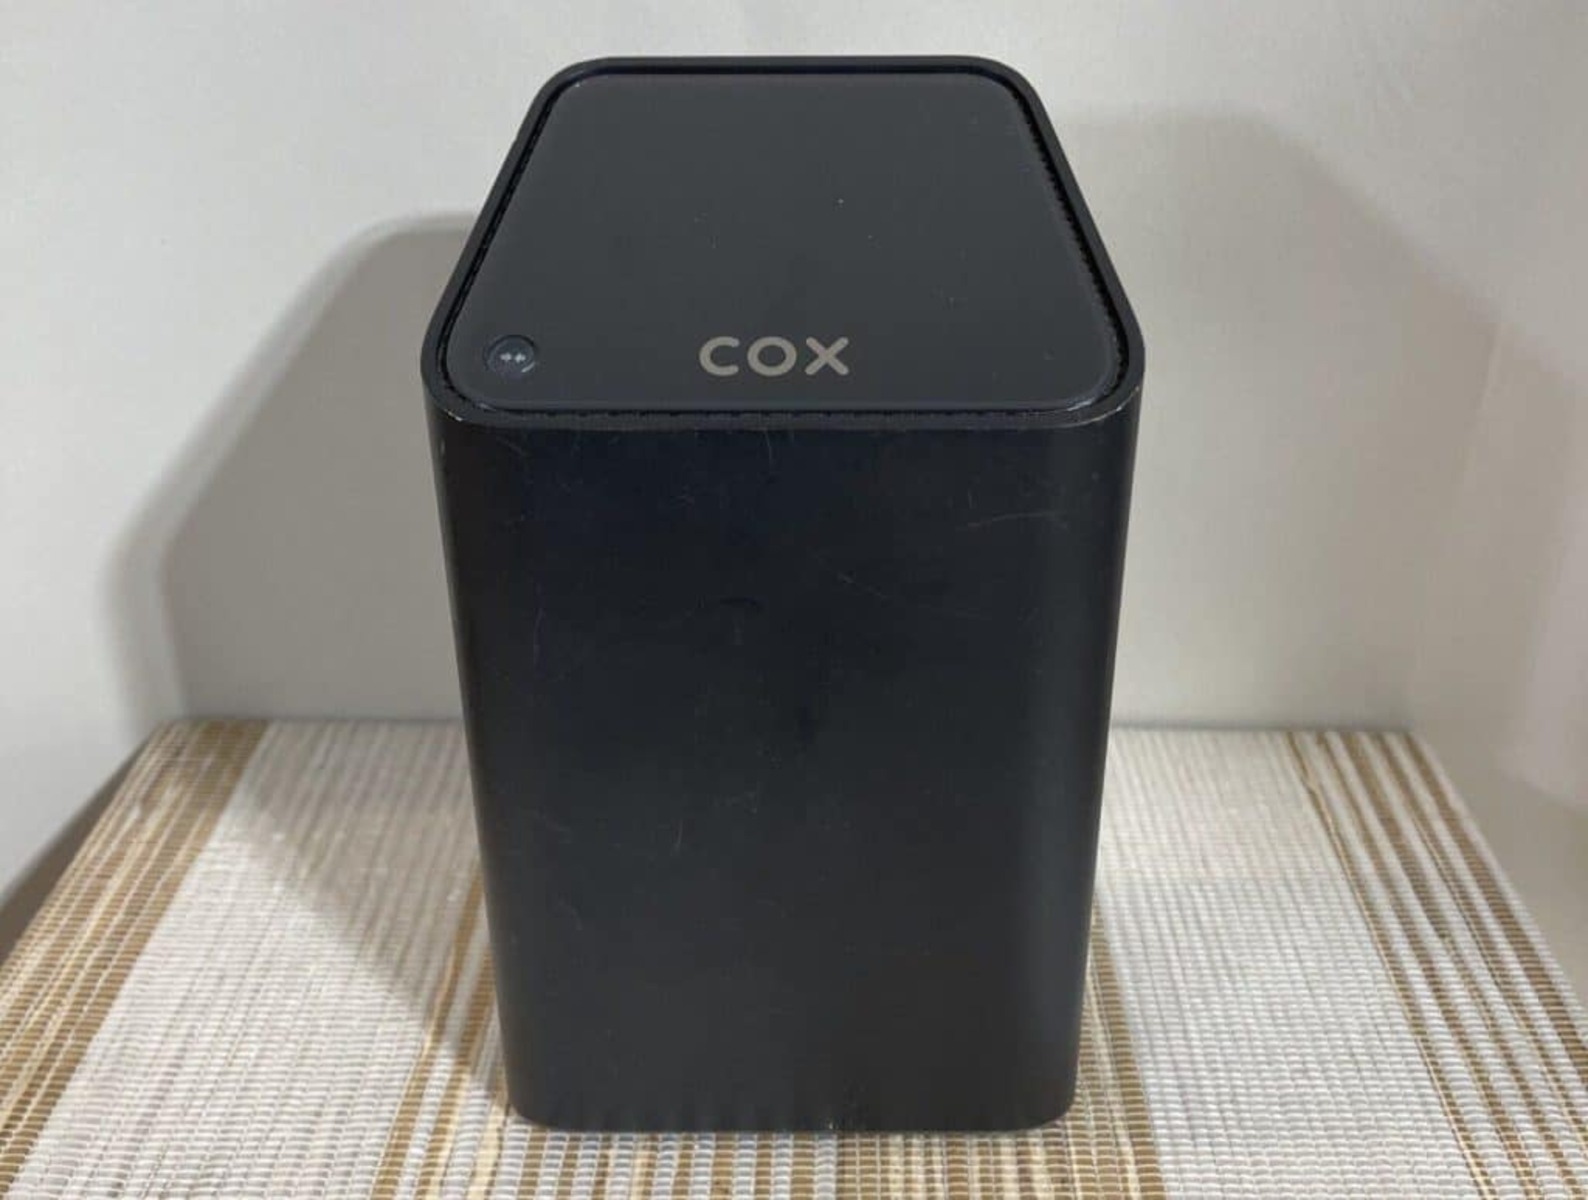 Cox WiFi Connectivity: Connecting To Hotspot Tutorial